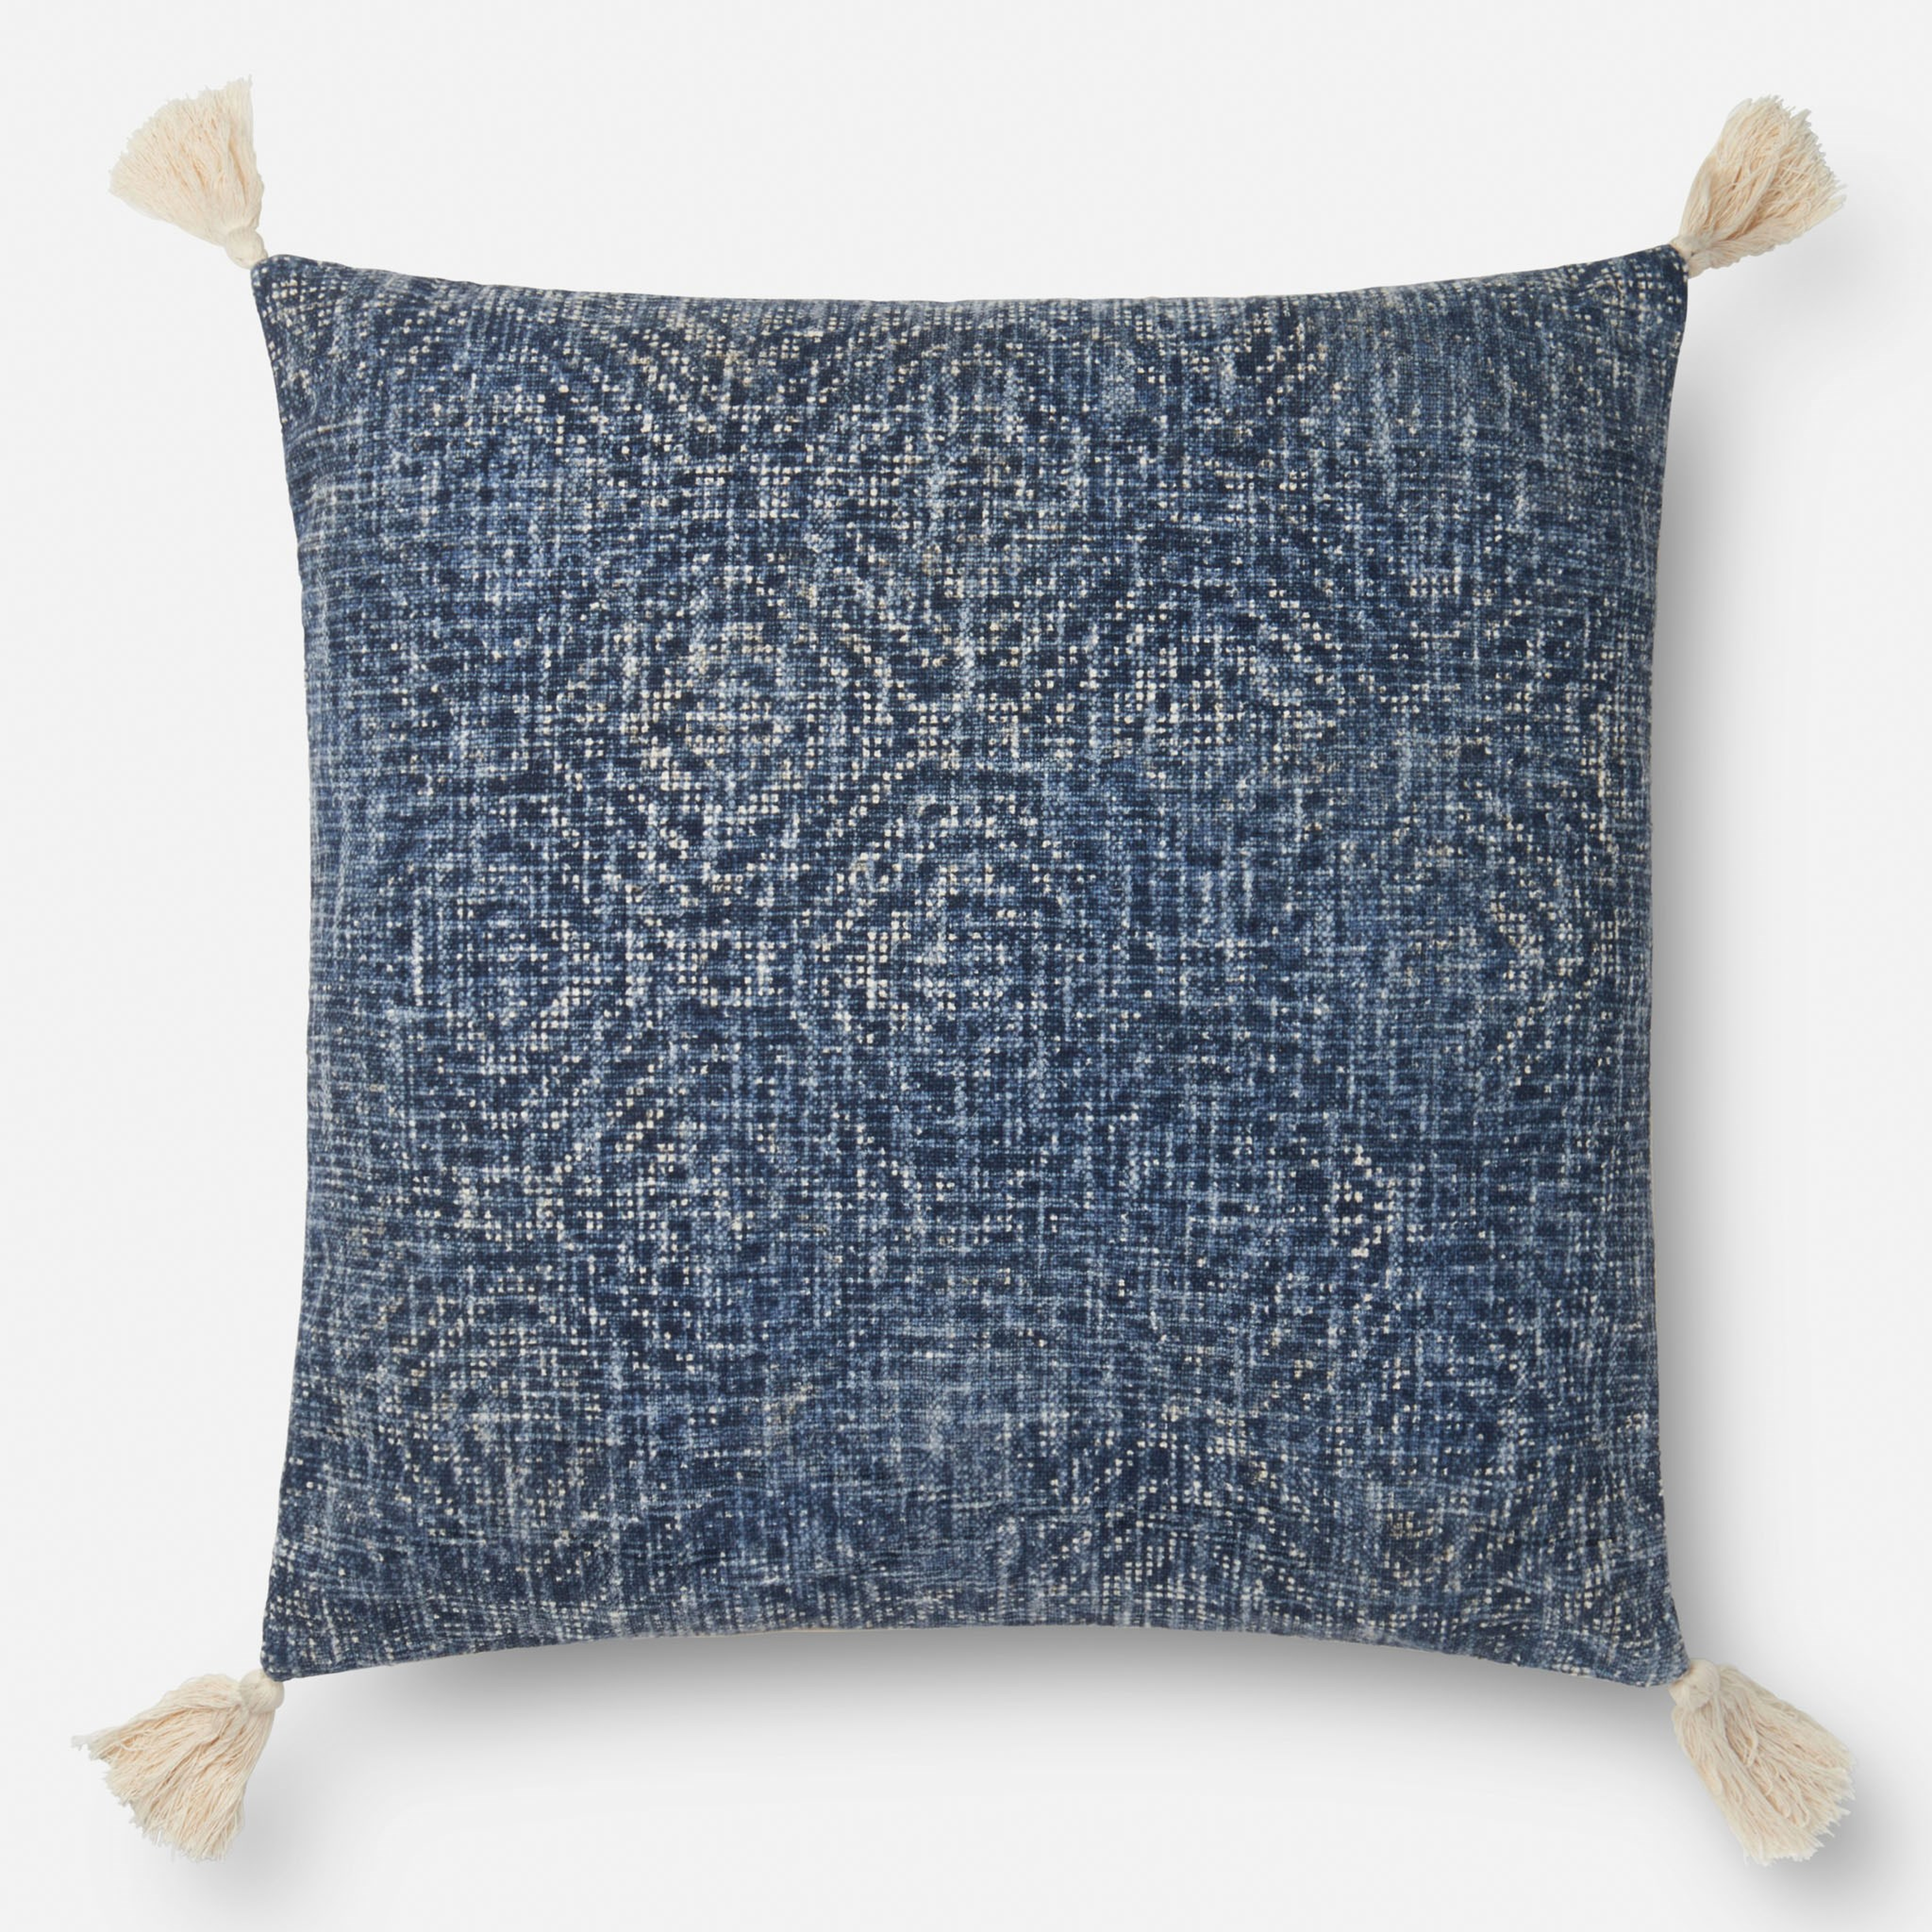 PILLOWS - BLUE - 22" X 22" Cover Only. Min. order quantity is 2 - Justina Blakeney x Loloi Rugs